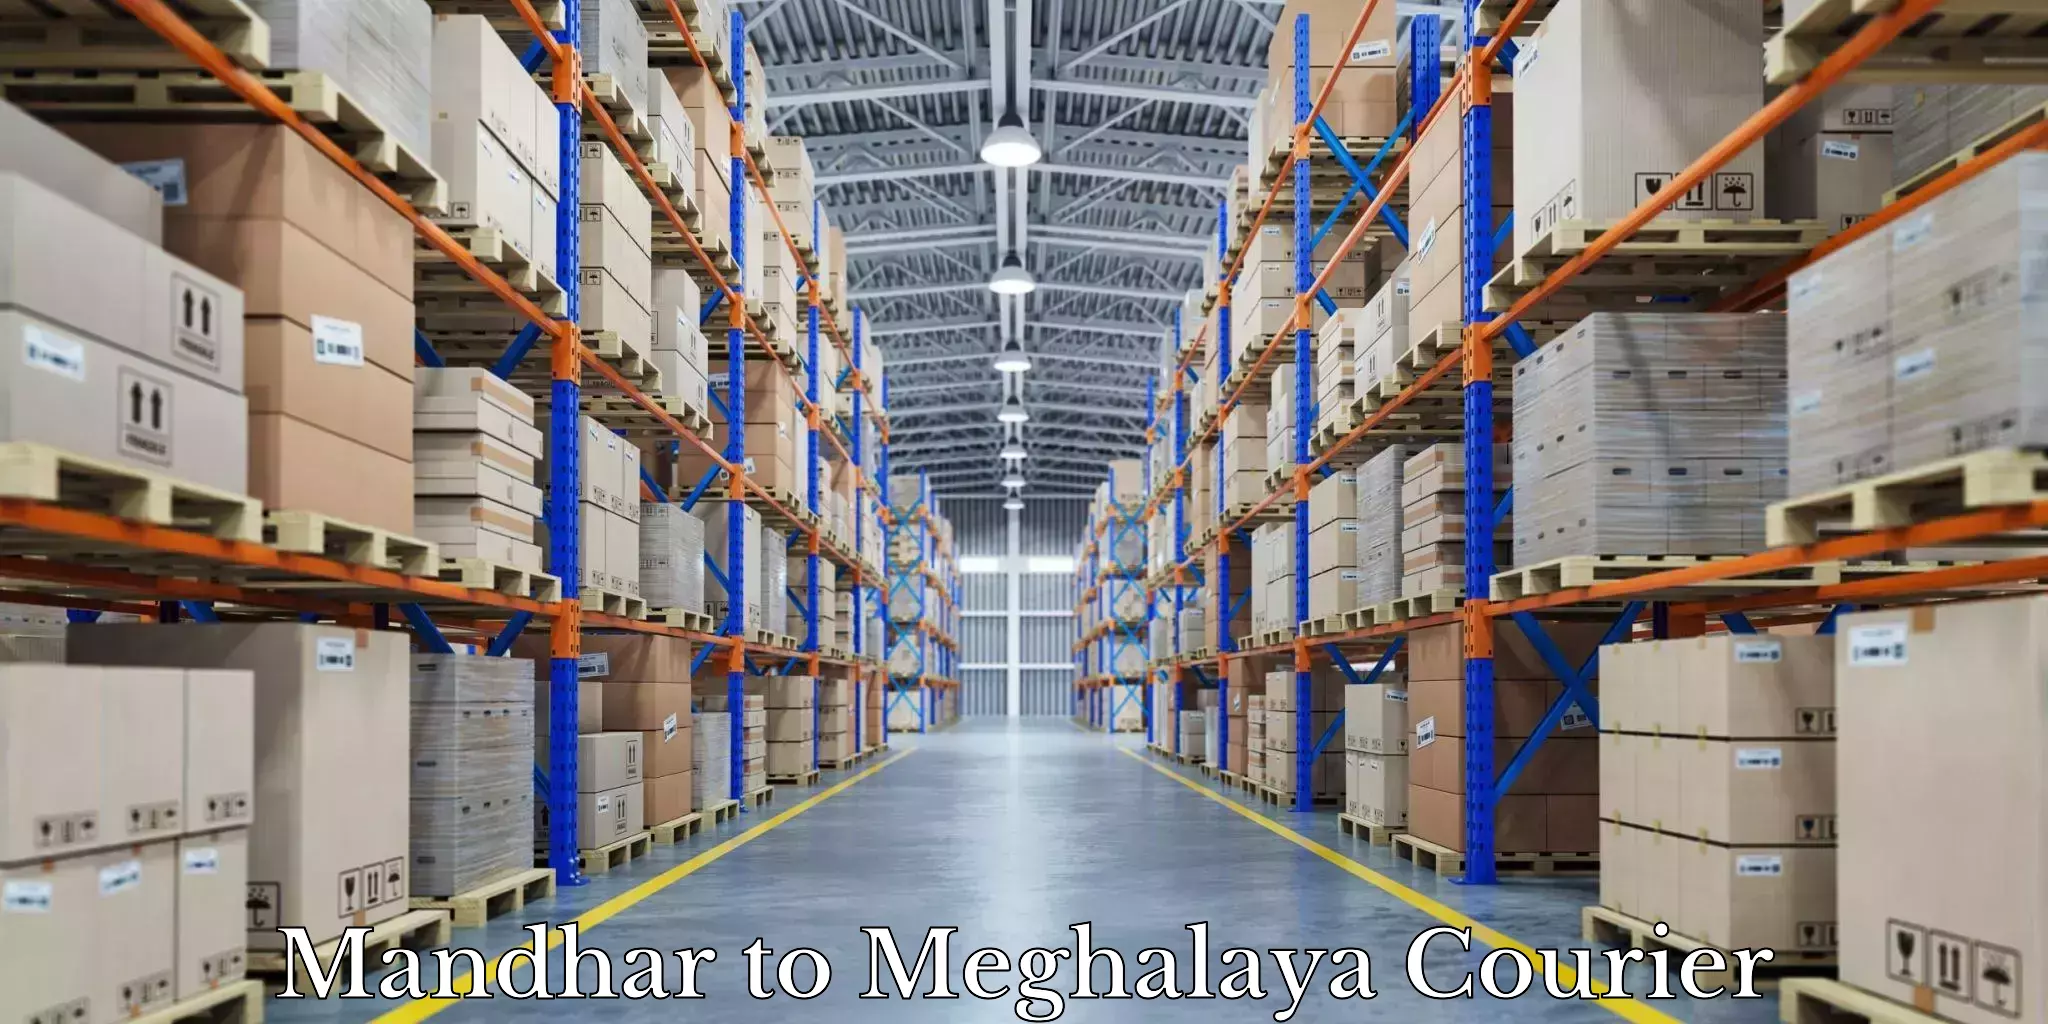 Expert moving and storage Mandhar to Shillong